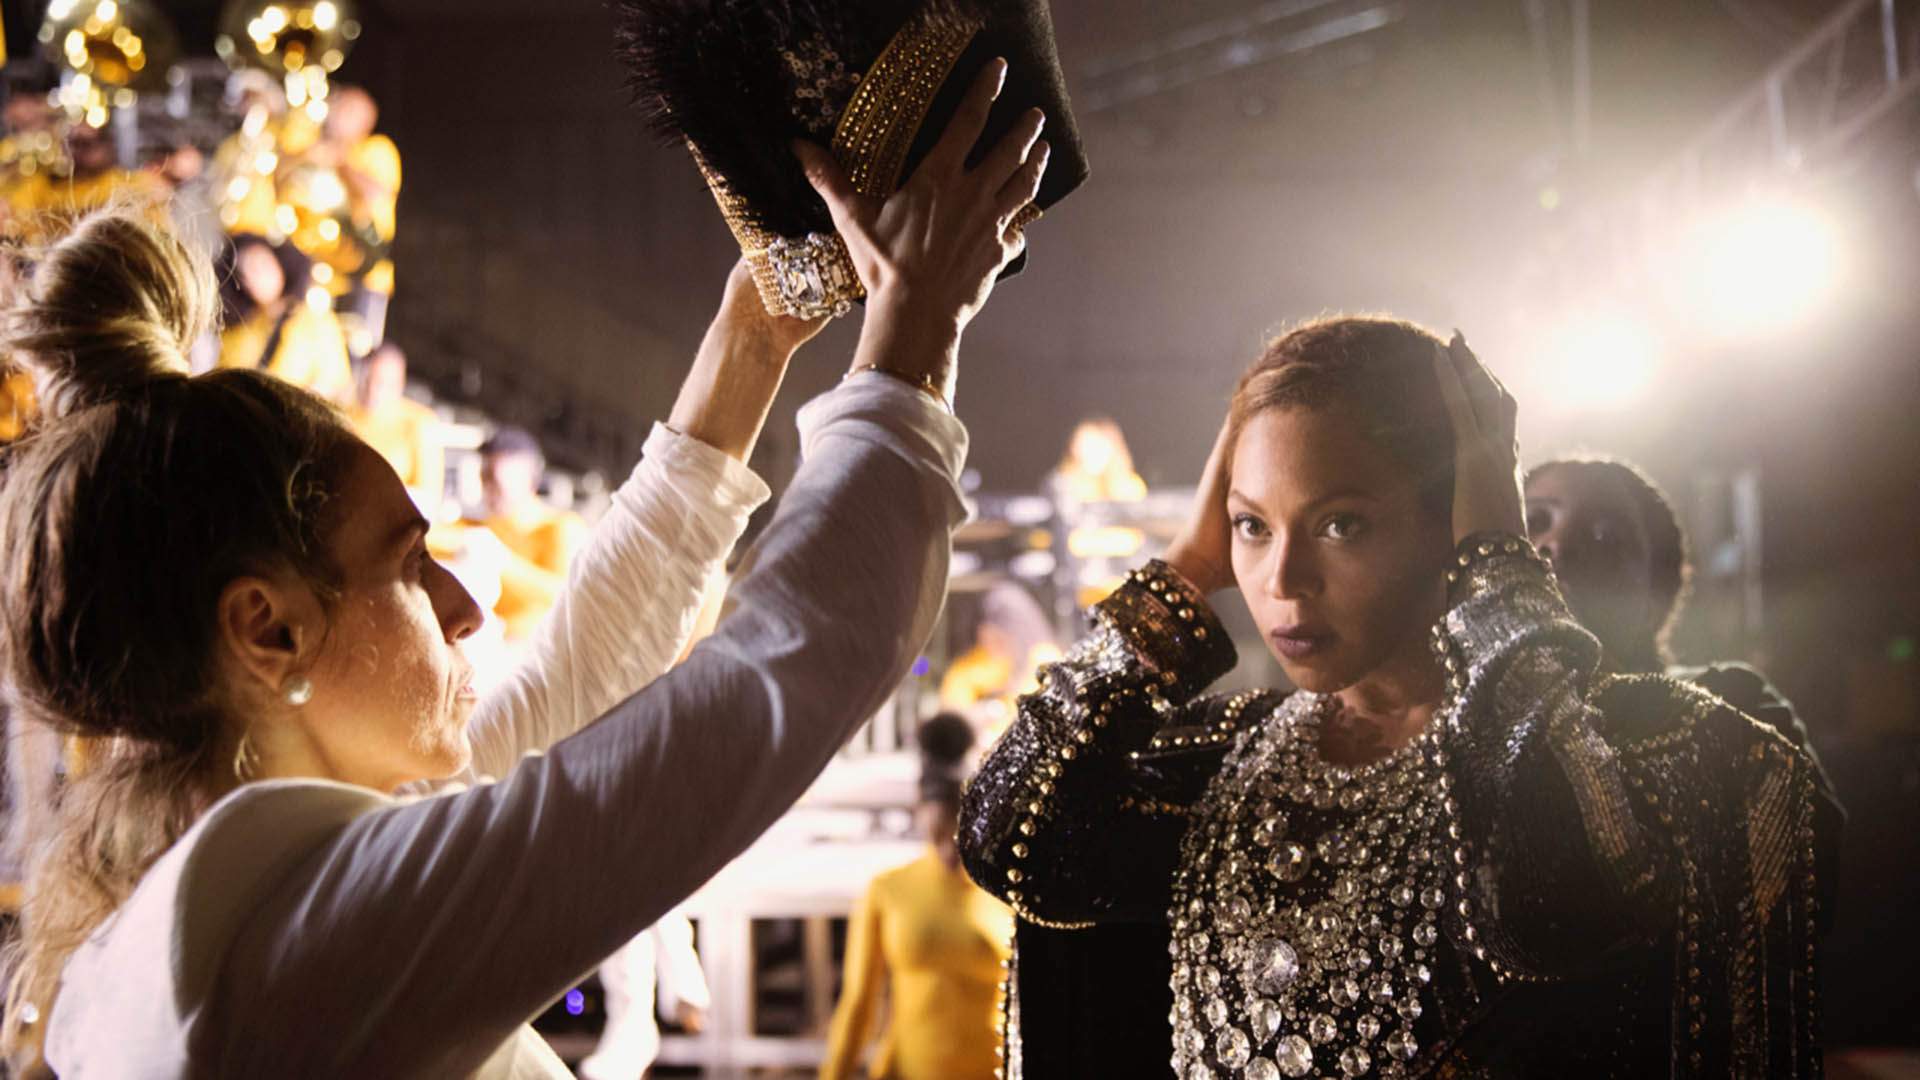 Two New Beyoncé Specials Could Be On Their Way to Netflix